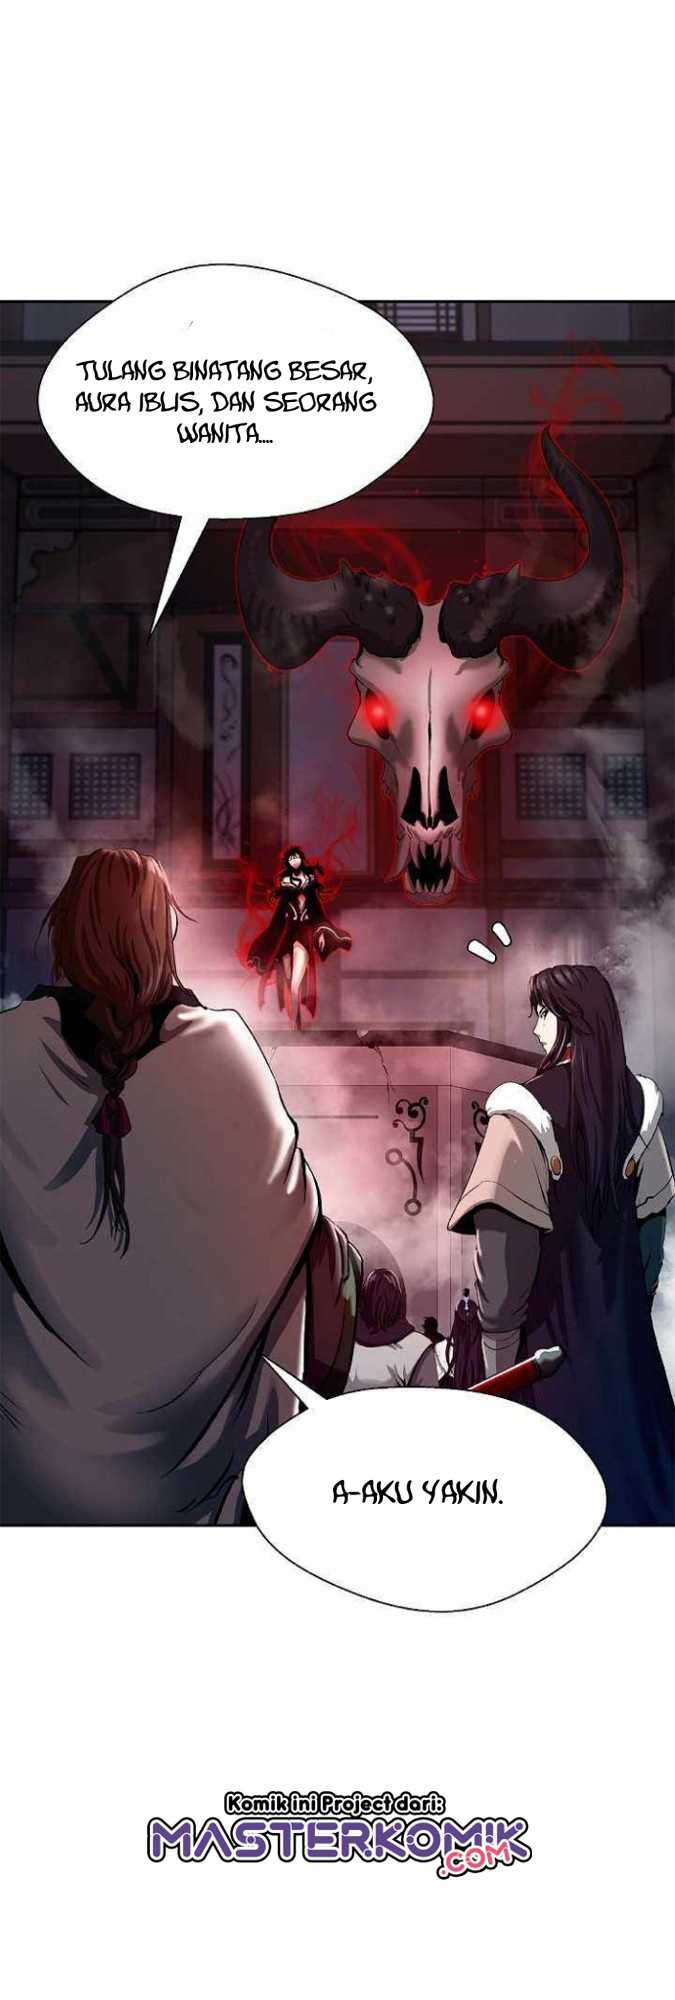 Cystic Story (Call The Spear) Chapter 53